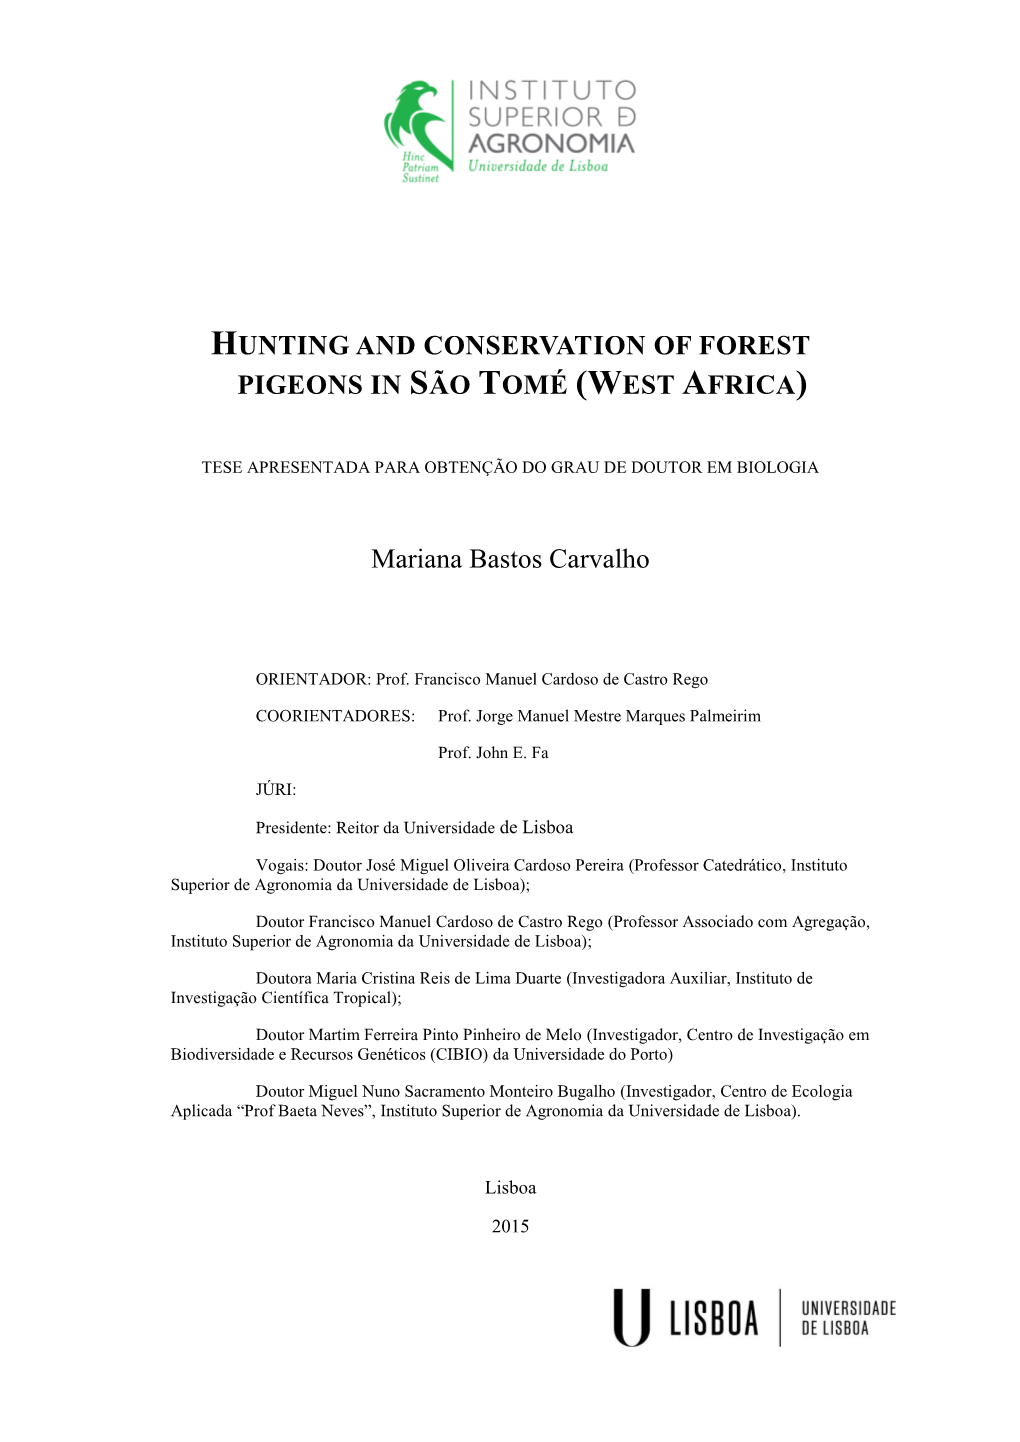 Hunting and Conservation of Forest Pigeons in São Tomé (West Africa)